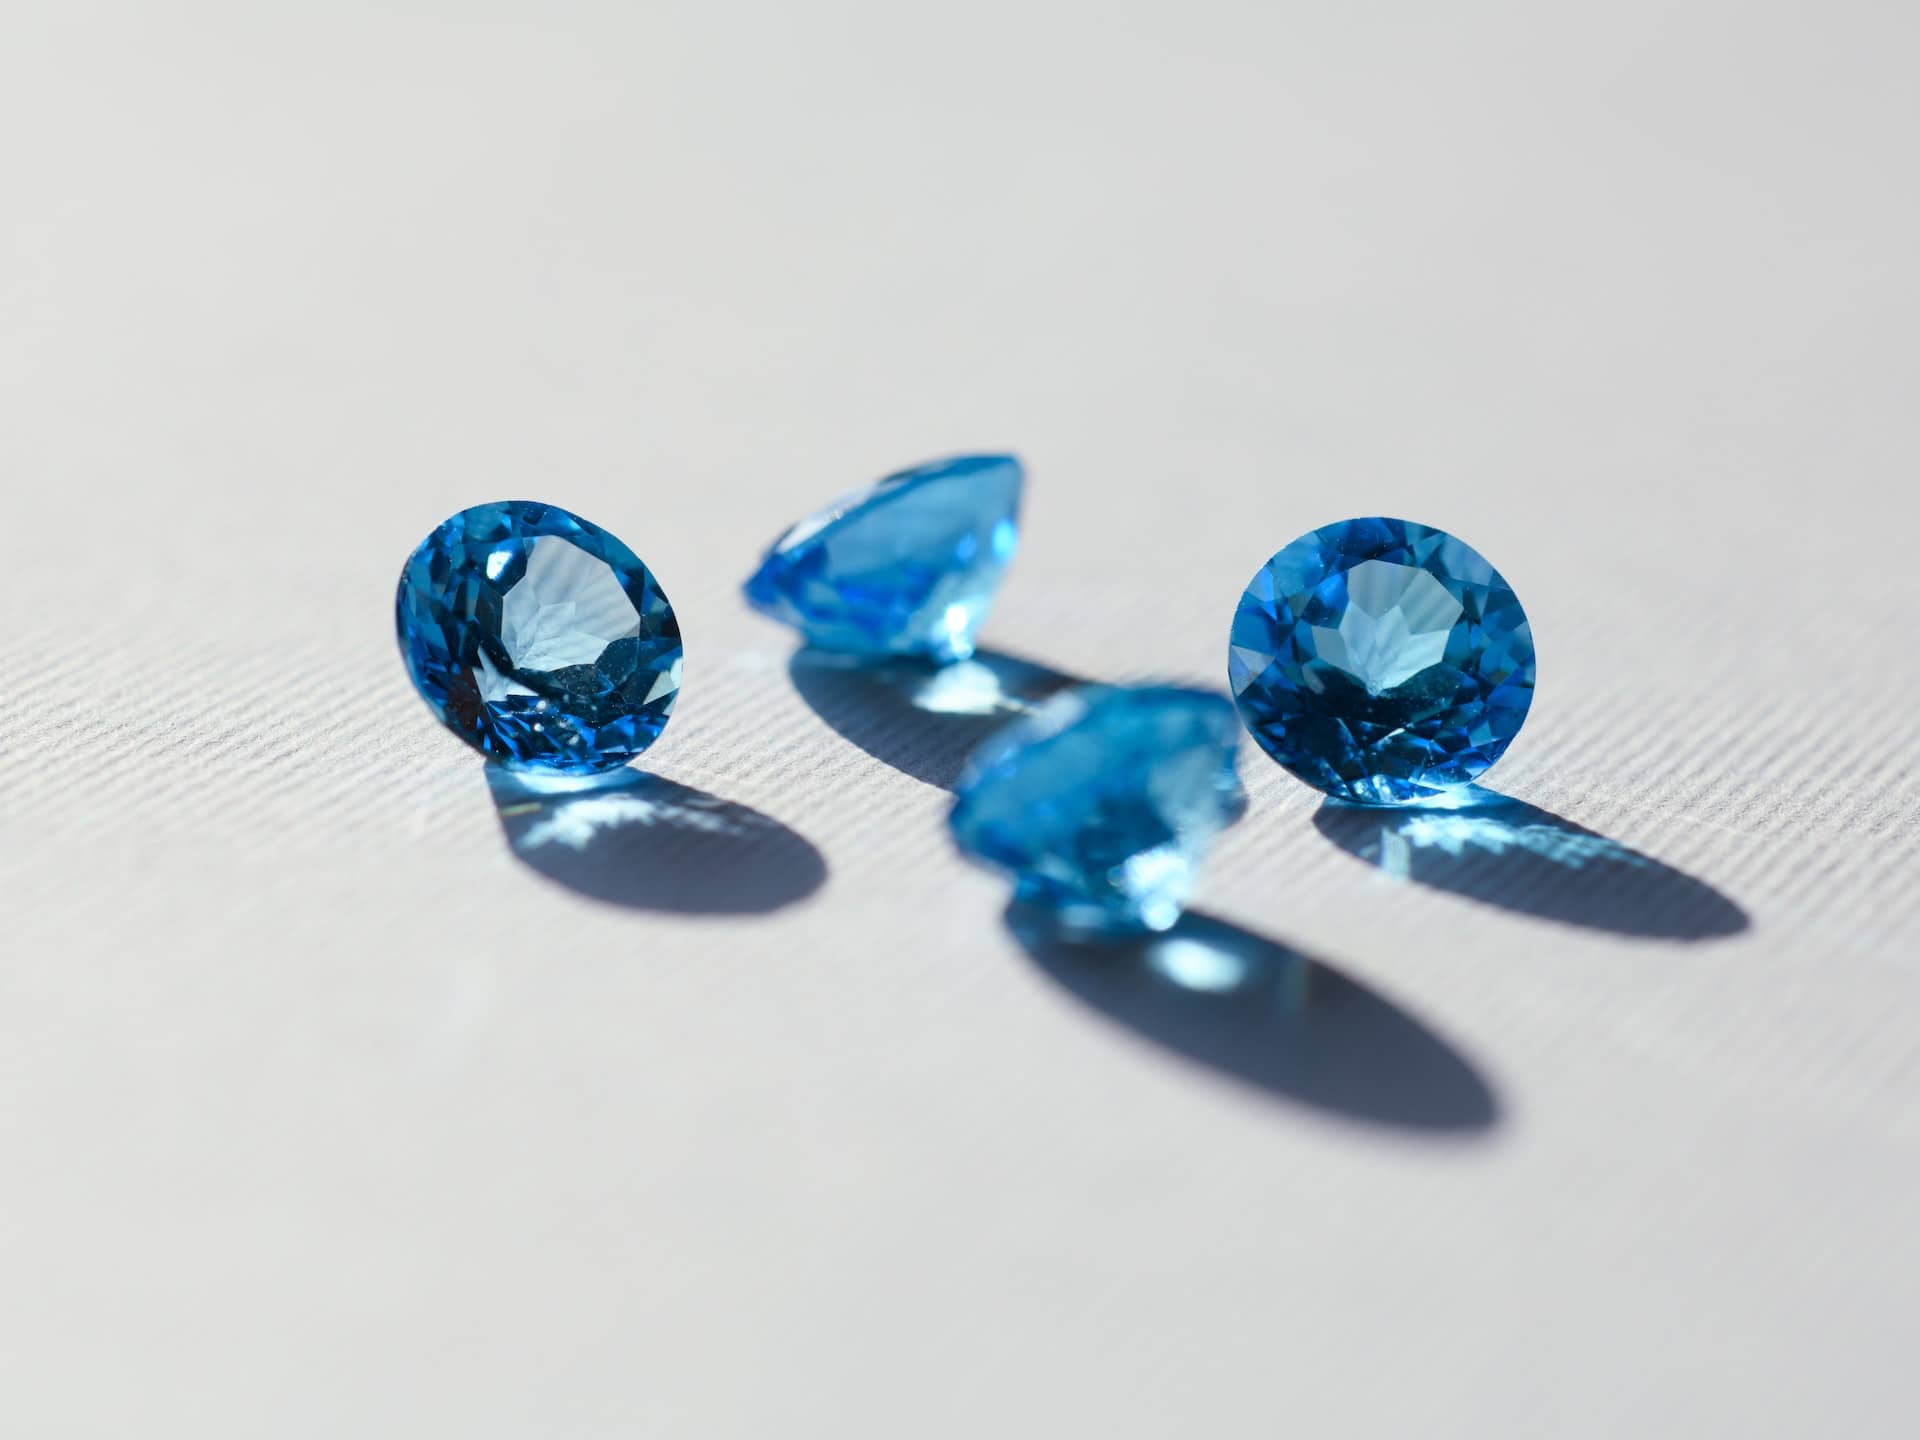 A collection of blue gemstones